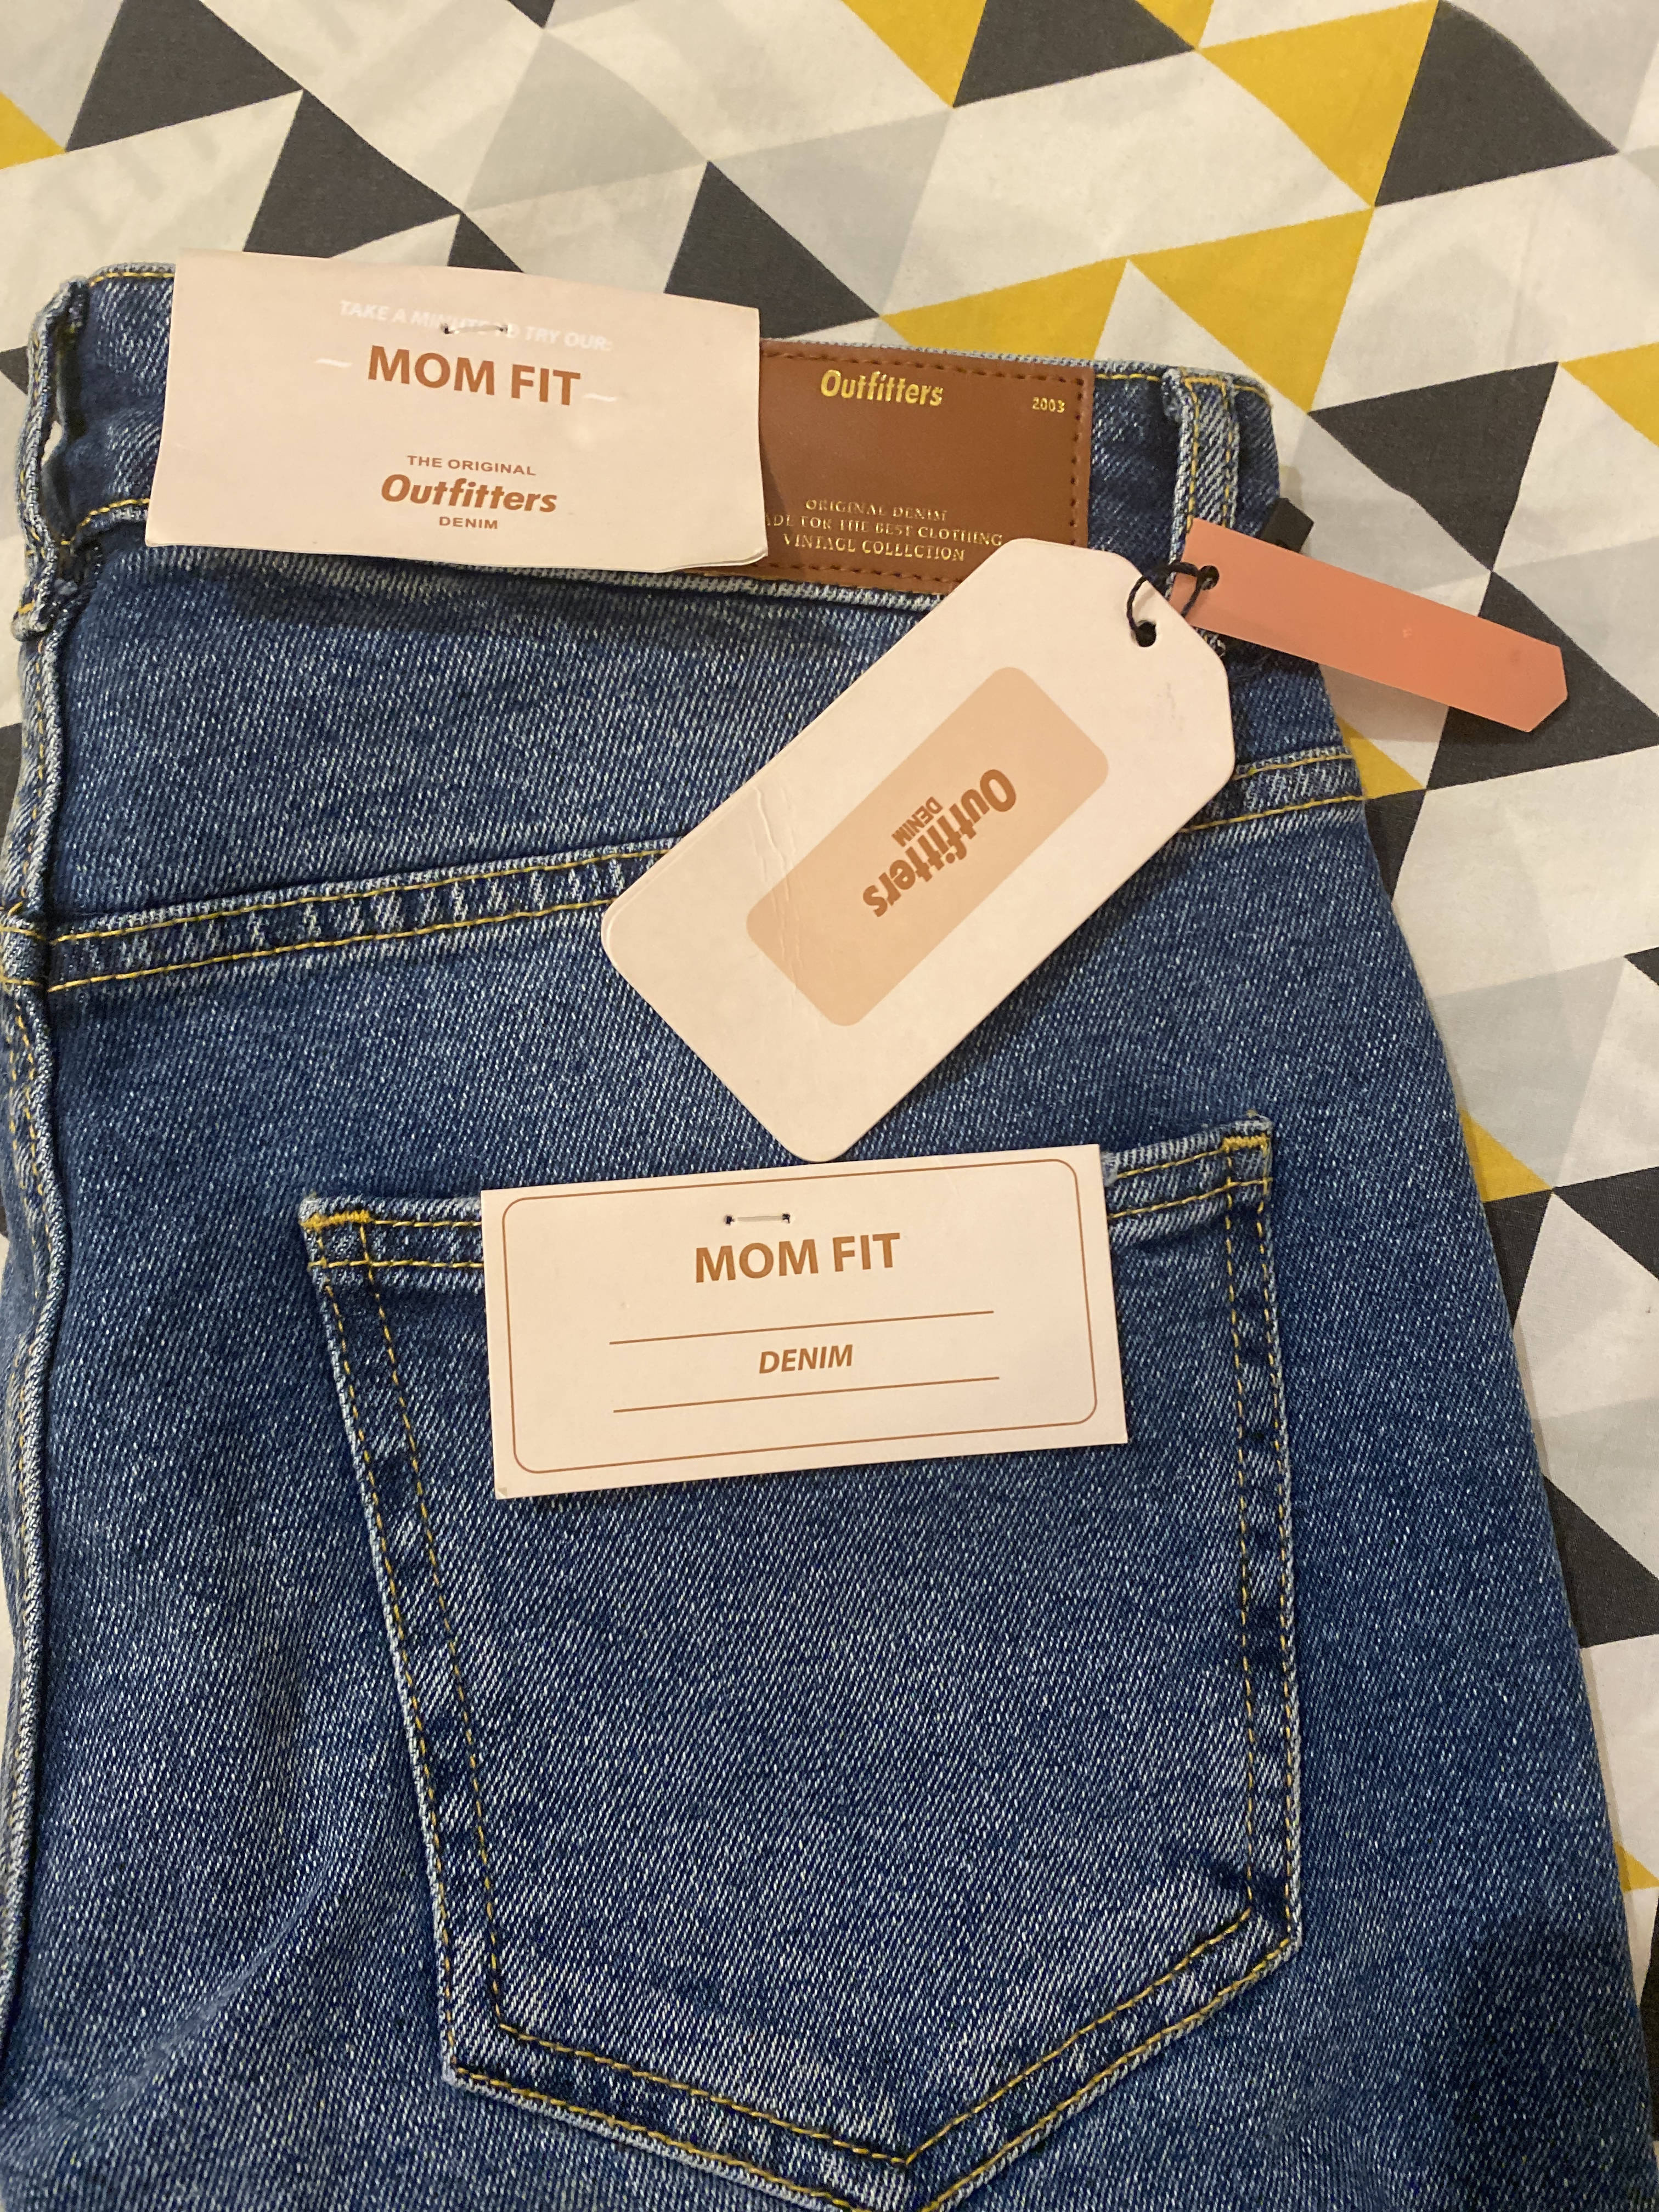 Outfitters | Blue mom fit jeans denim (Size 30) | Women Bottoms & Pants | Brand New